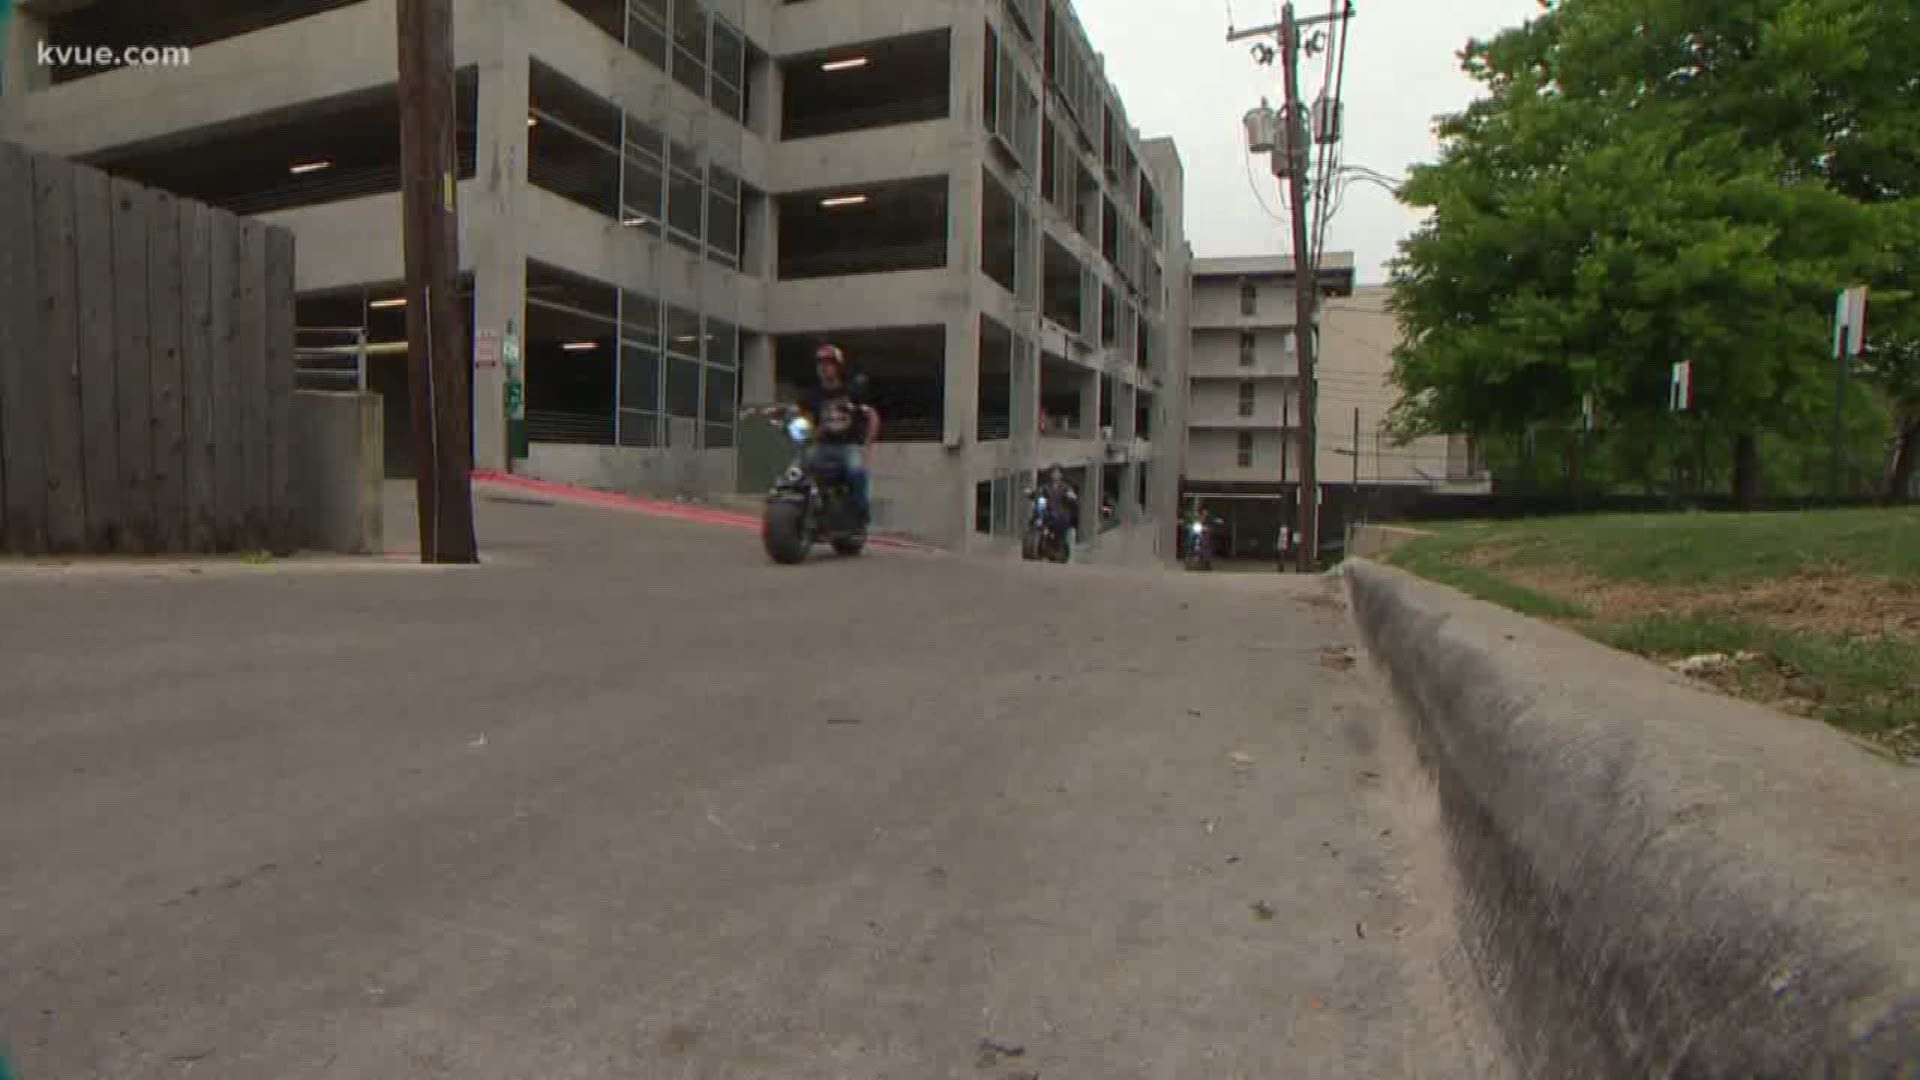 Verify: Where can you ride electric bikes in Austin?